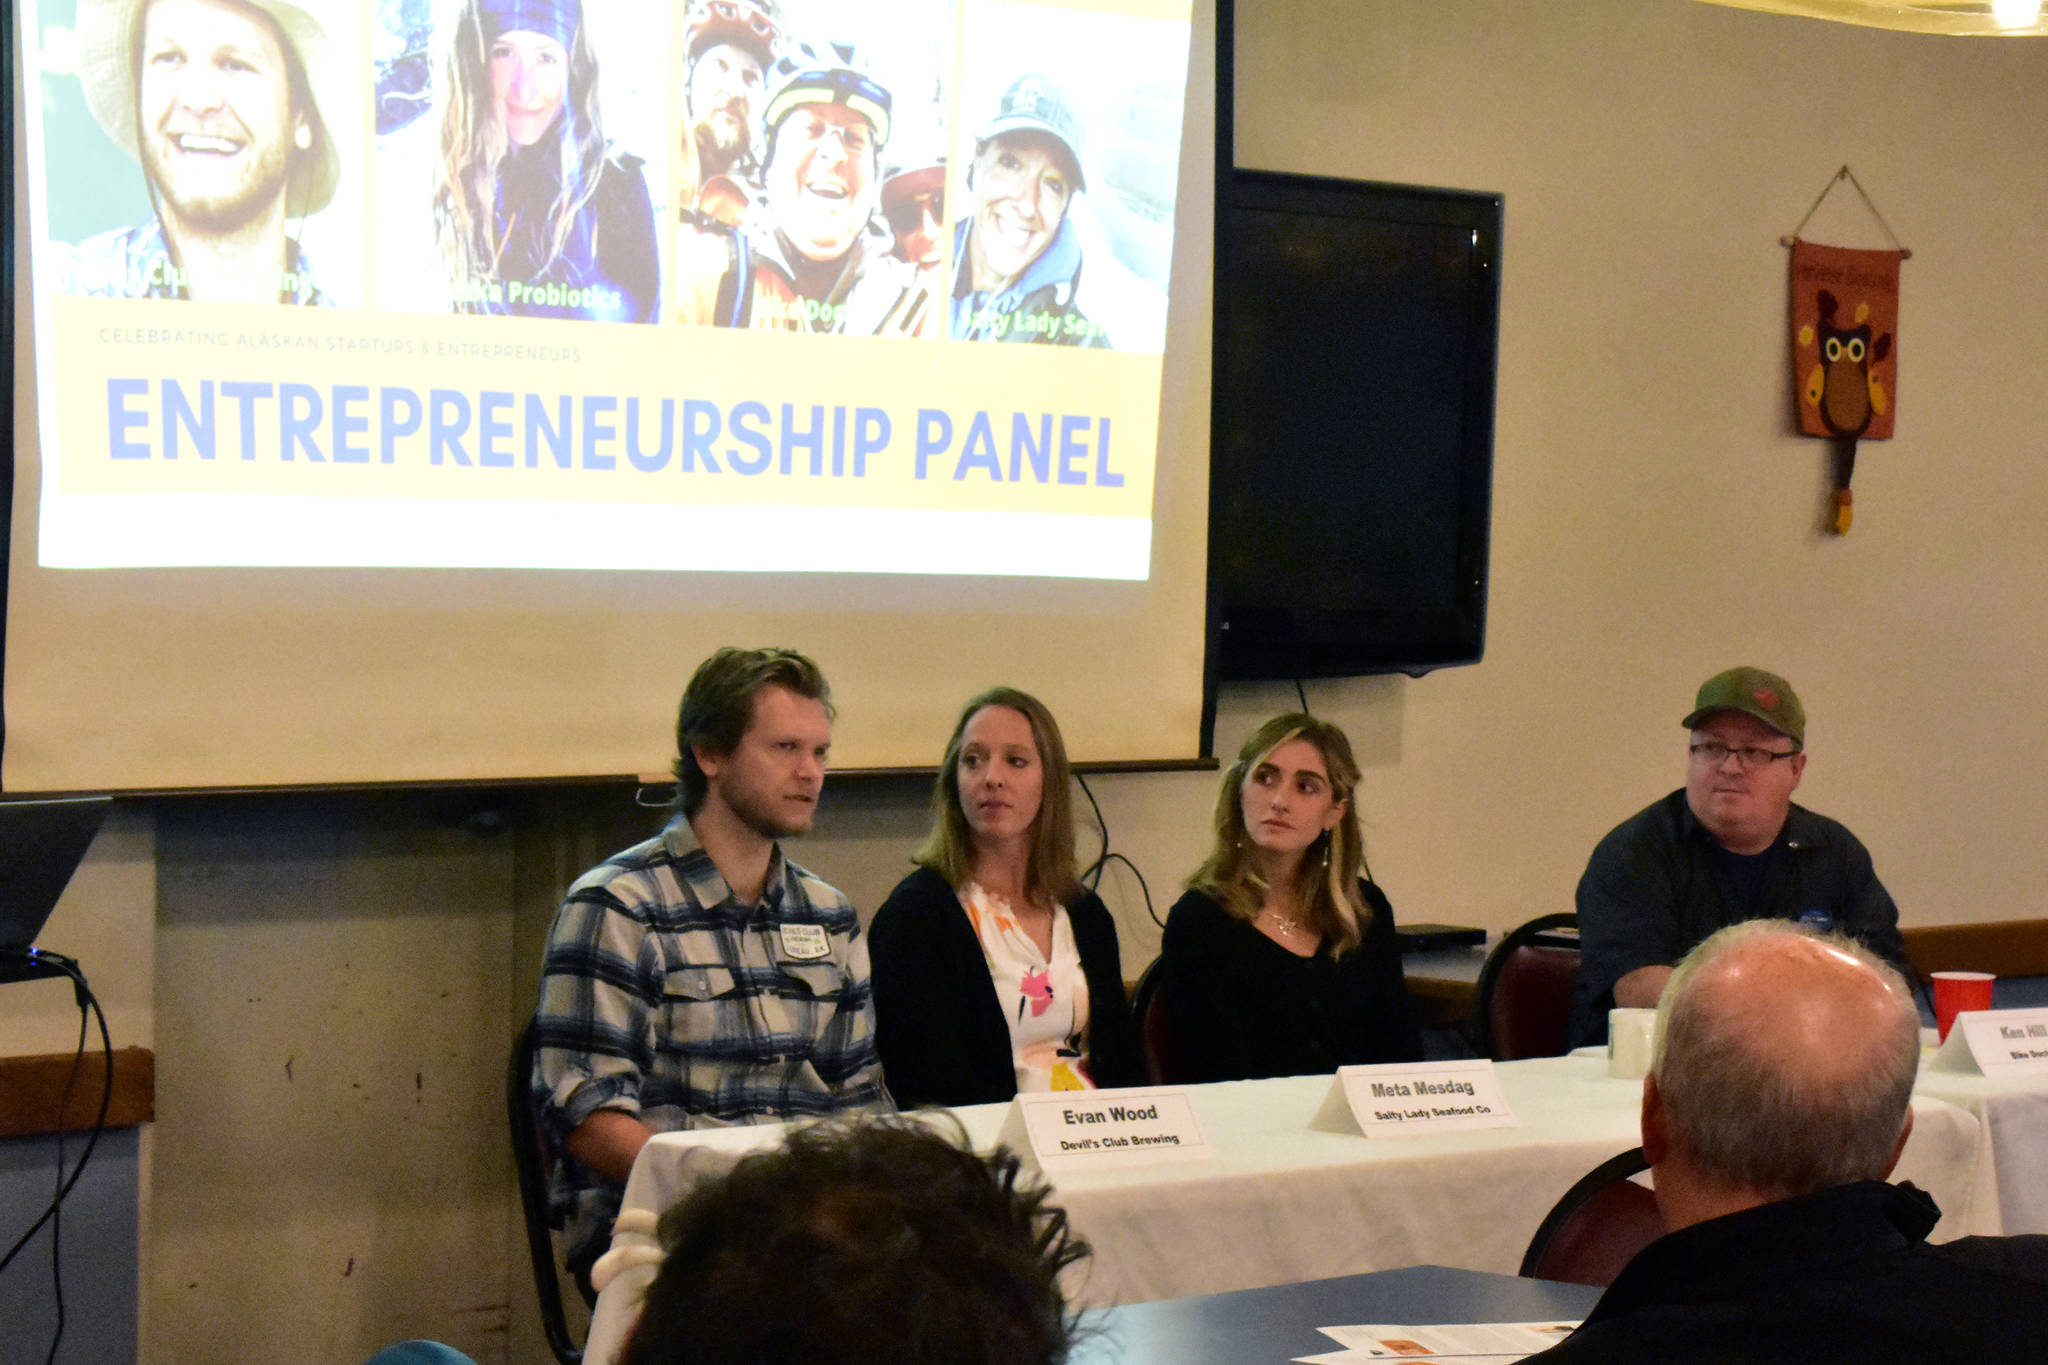 From left, Evan Wood of Devil’s Club Brewing; Meta Mesdag of Salty Lady Seafood Co.; Kaila Buerger of Alaska Probiotics and Ken Hill of Juneau Bike Doctor. They were invited to speak for an Entrepreneurship Panel at the Juneau Chamber of Commerce Luncheon at the Moose Family Lodge on Thursday, Nov. 14, 2019. (Peter Segall | Juneau Empire)